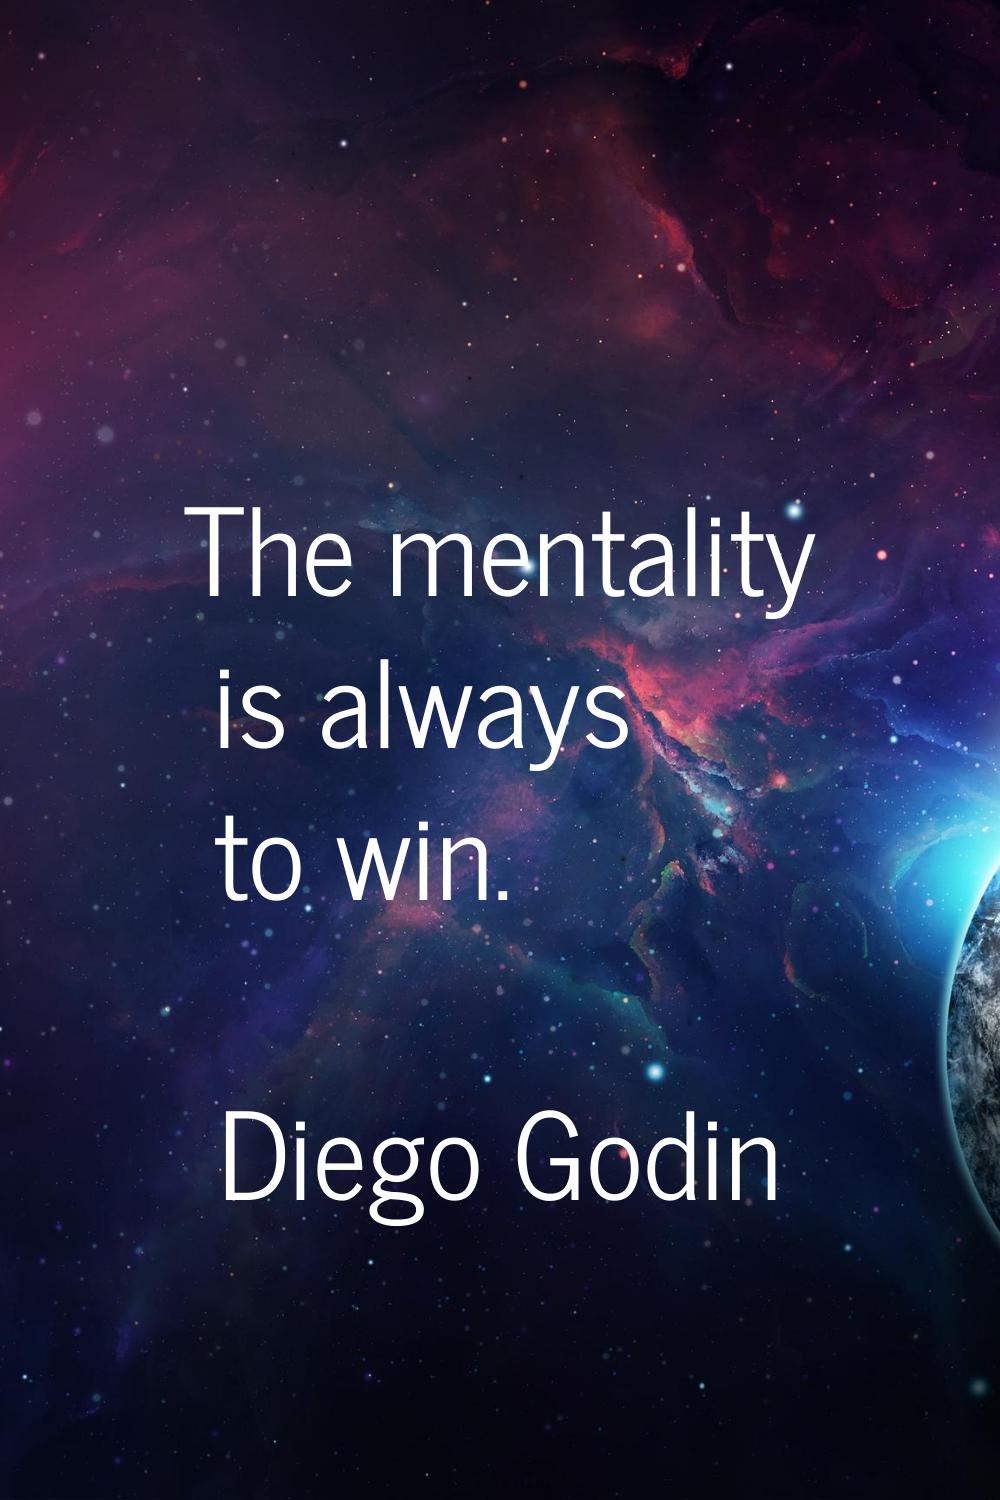 The mentality is always to win.